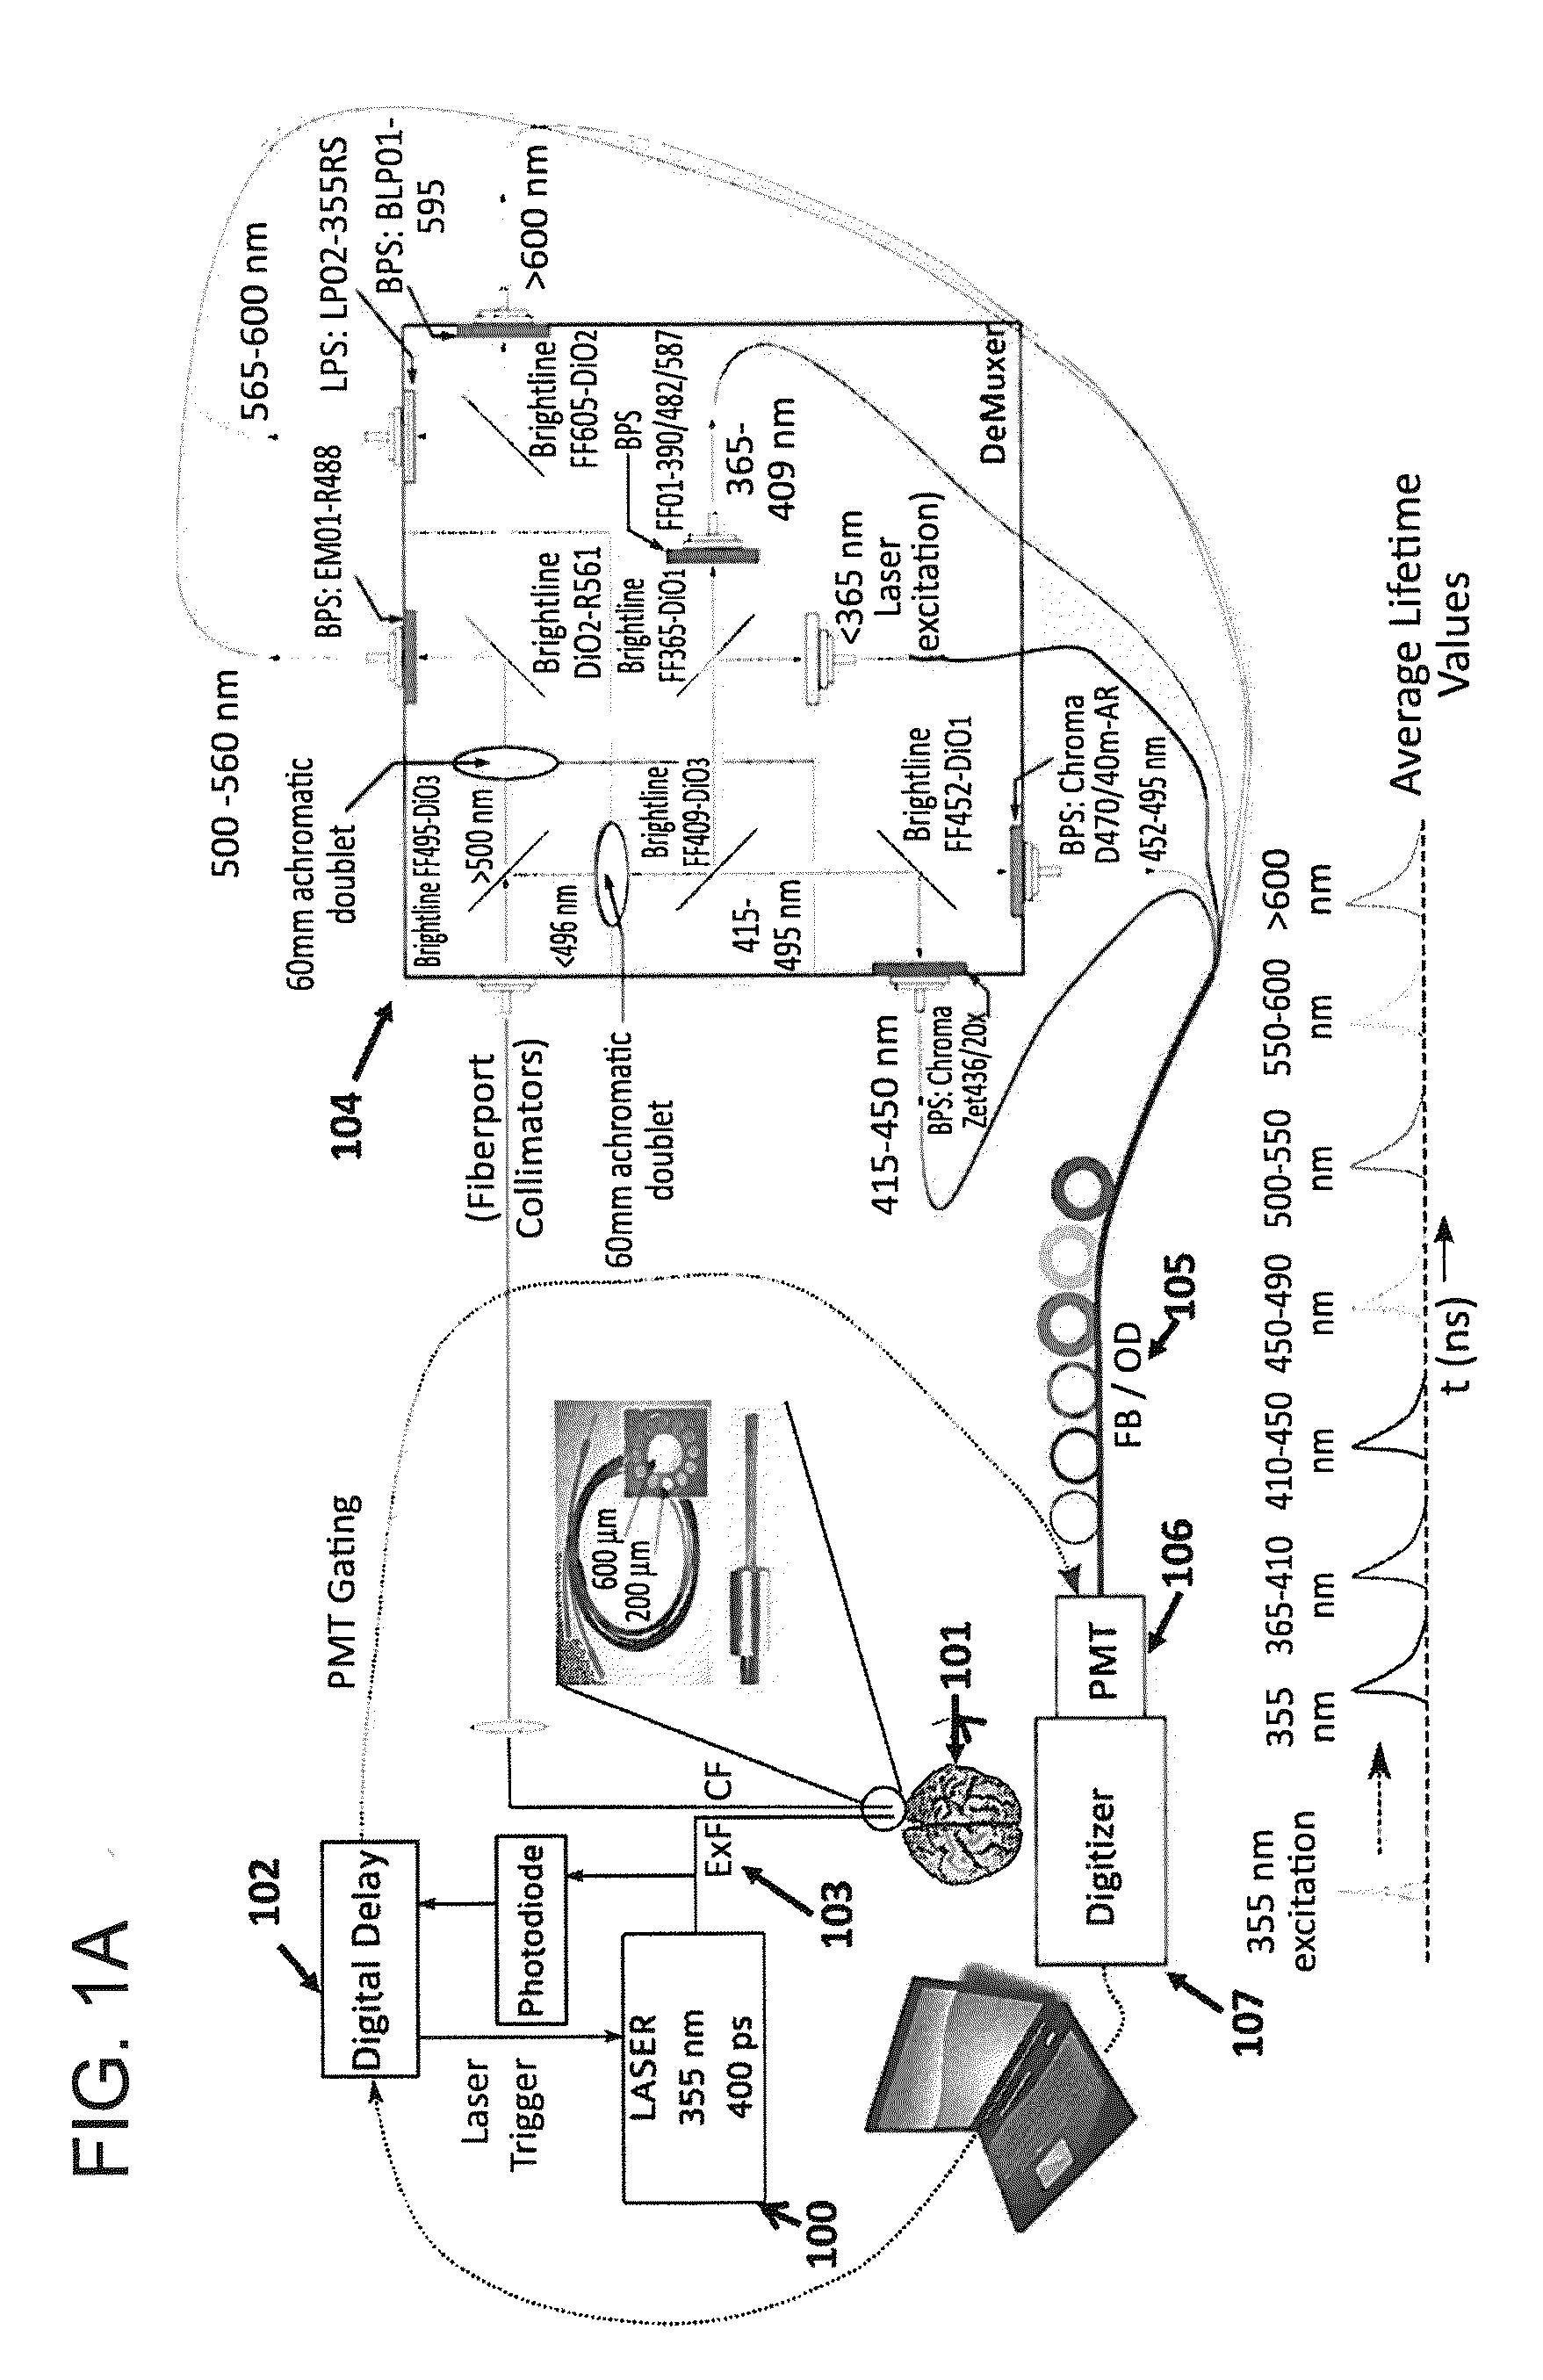 Time-resolved laser-induced fluorescence spectroscopy systems and uses thereof